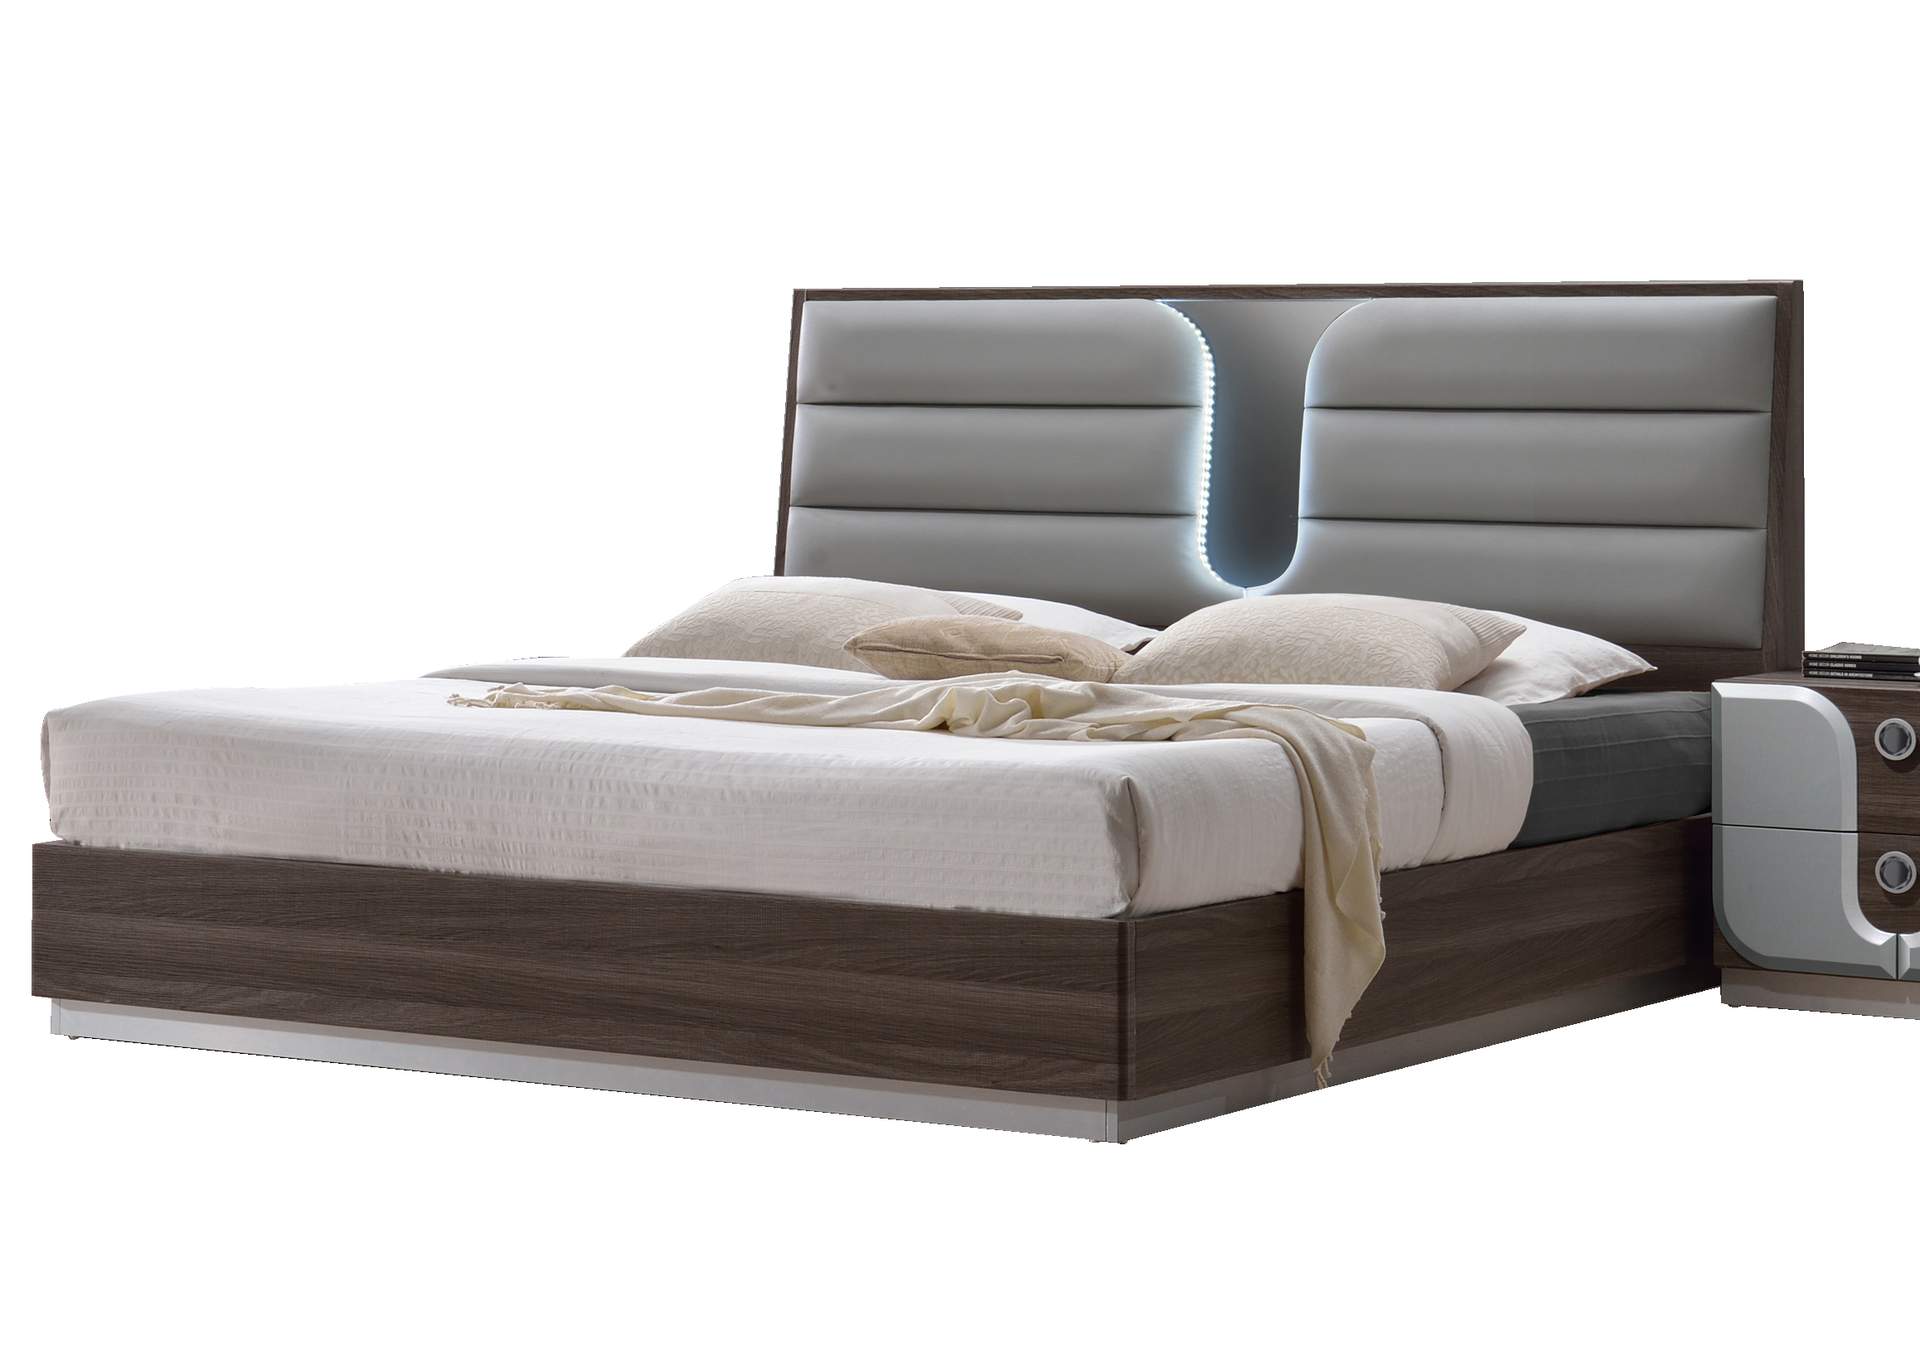 Modern 4-Piece Bedroom Set w/ Queen Size Bed,Chintaly Imports